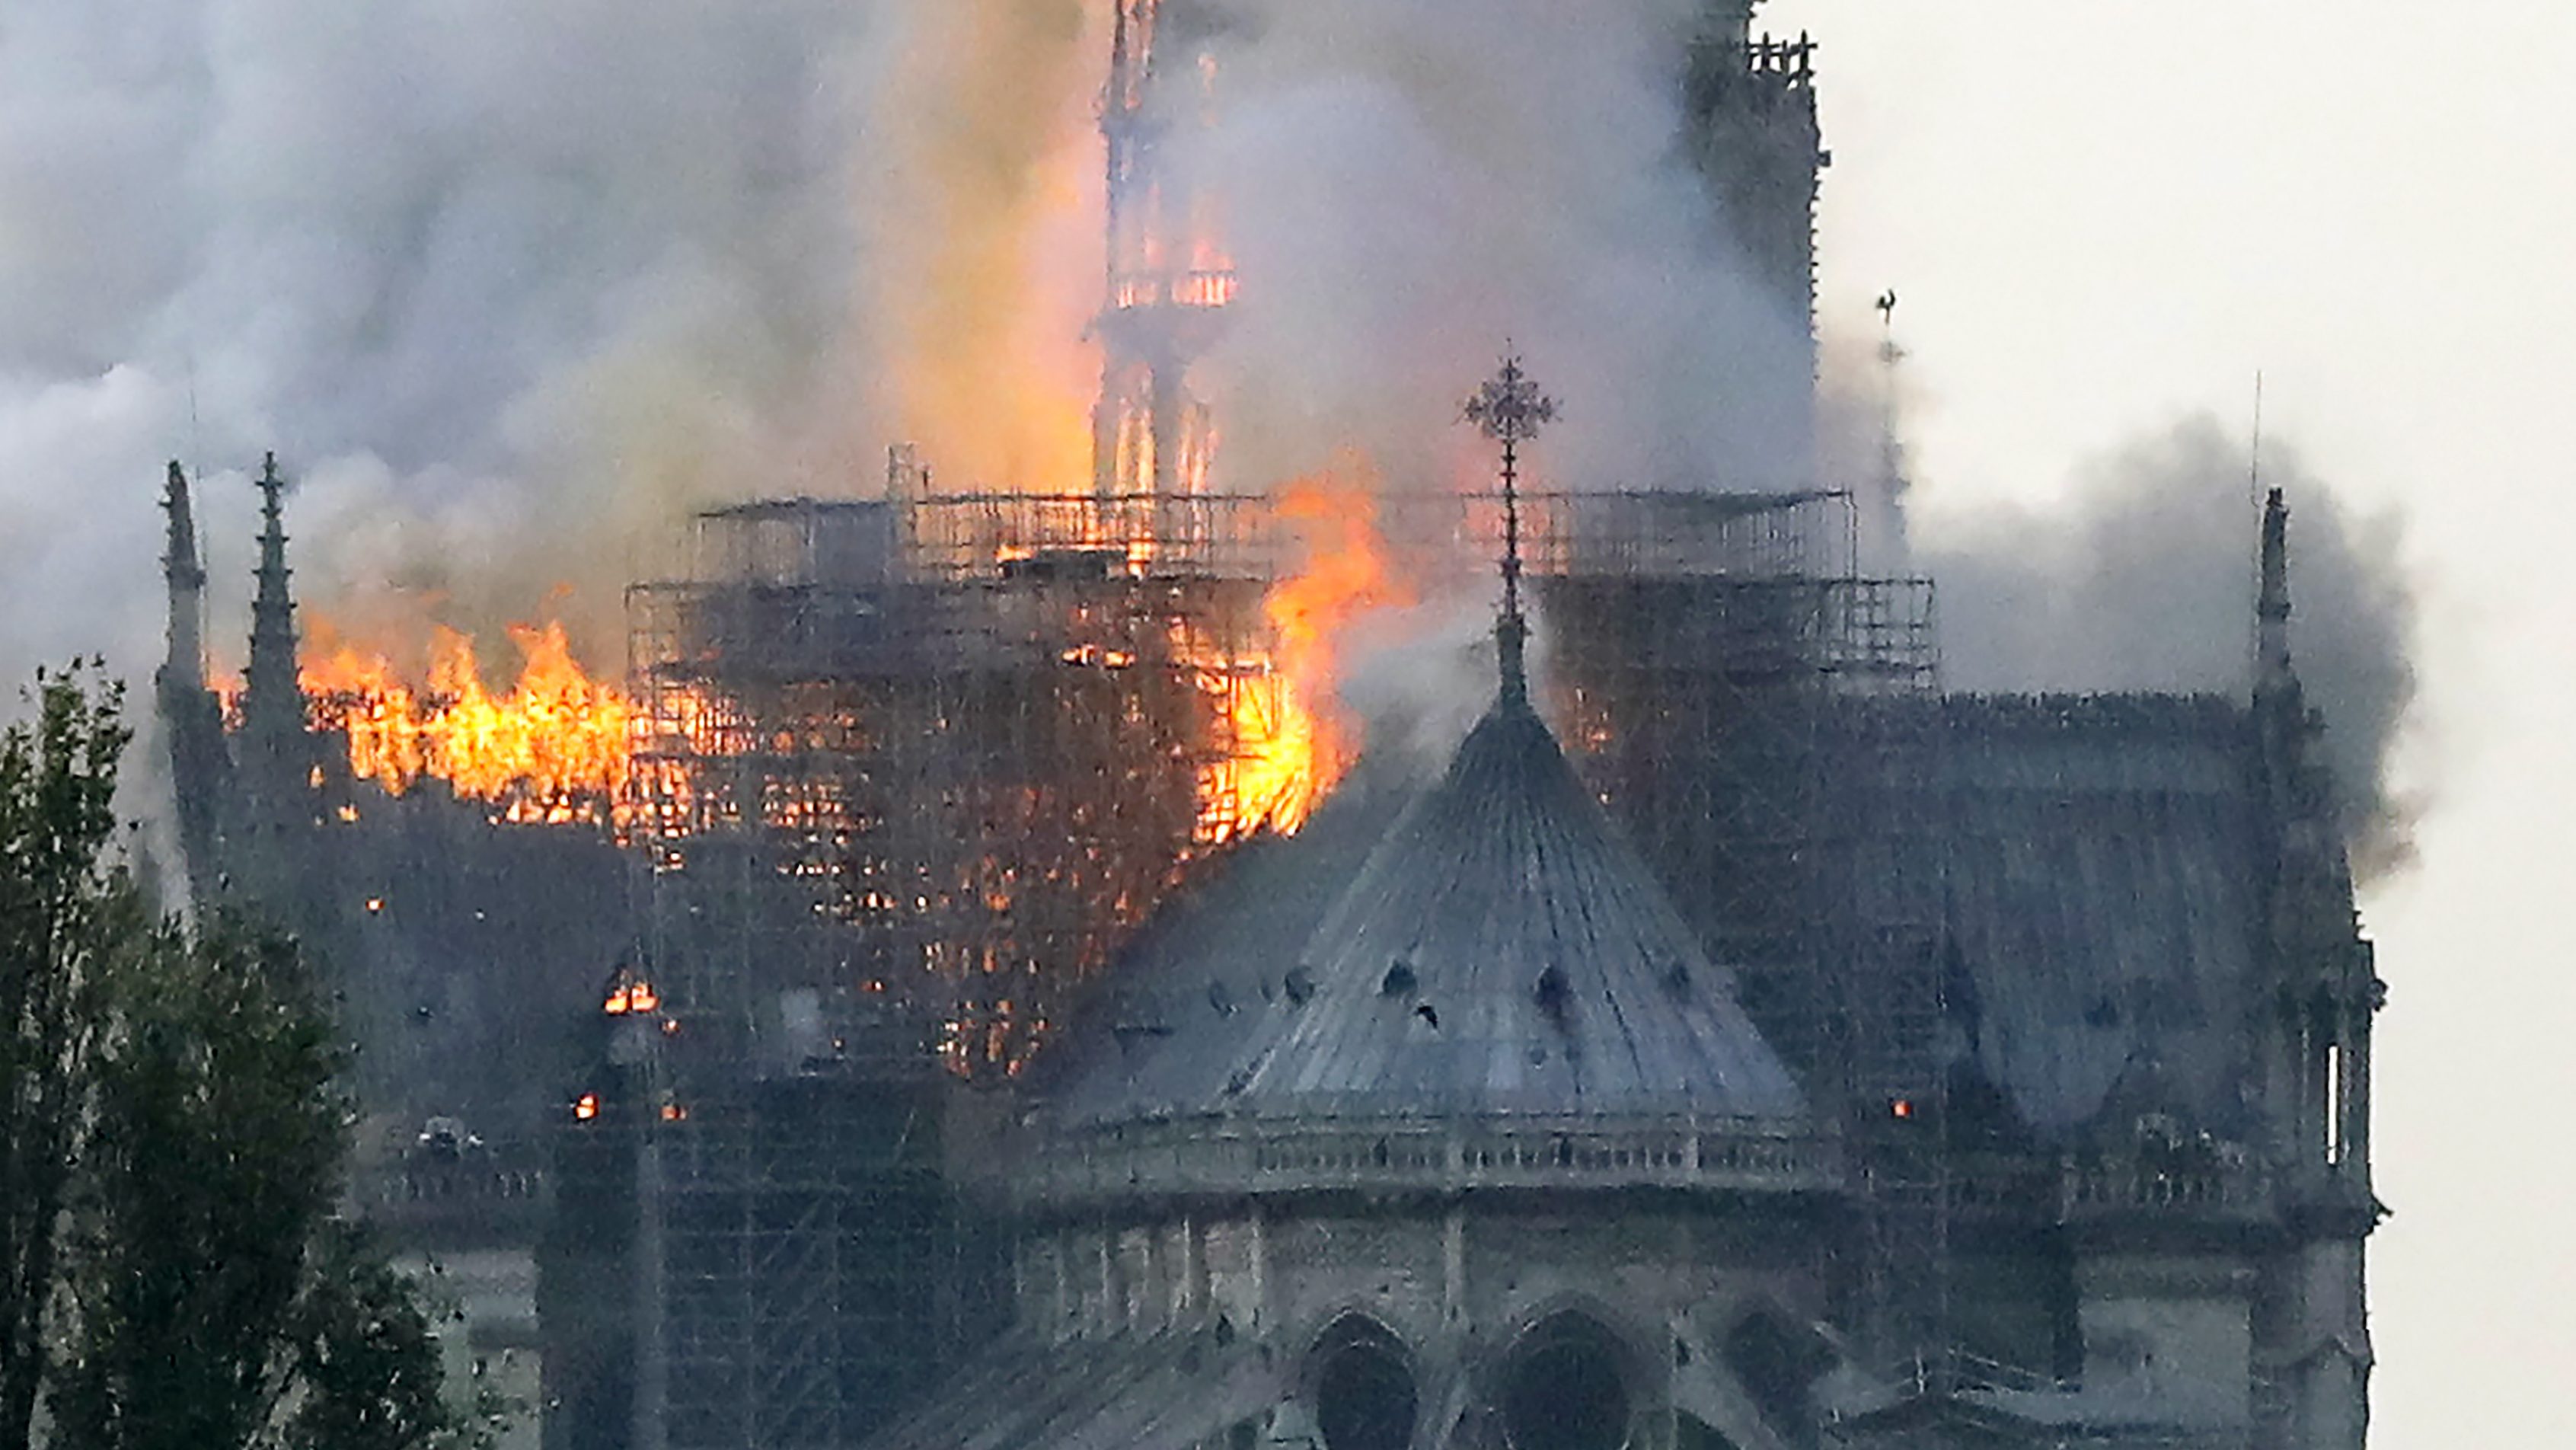 WATCH: Fire at Notre Dame Cathedral in Paris [VIDEO] | Heavy.com